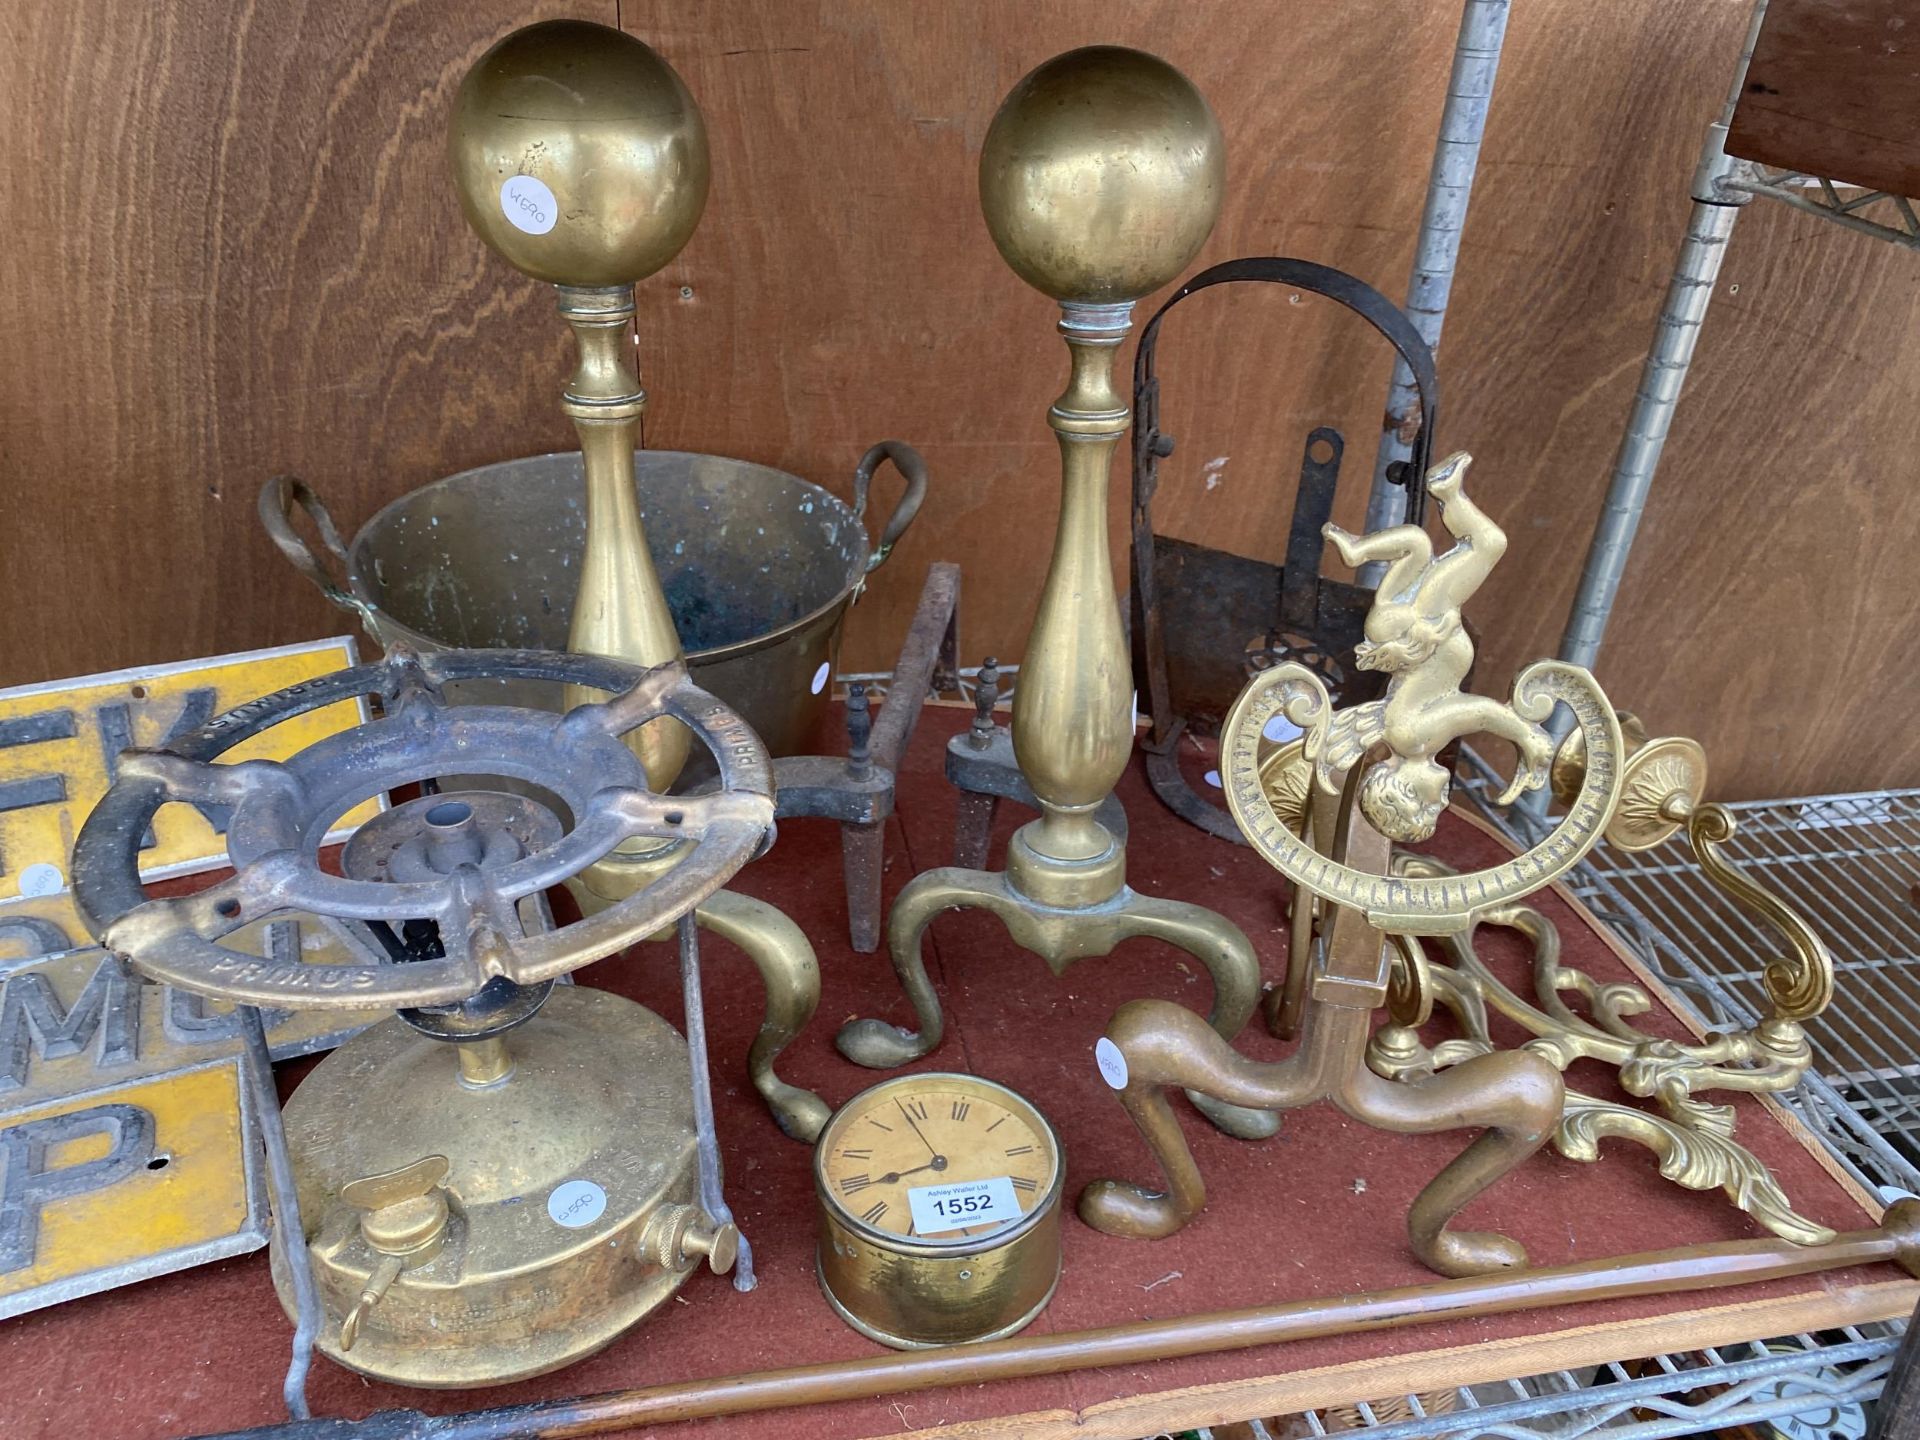 AN ASSORTMENT OF VNTAGE METAL WARE ITEMS TO INCLUDE A PRIMUS STOVE, A BRASS JAM PAN AND BRASS FIRE